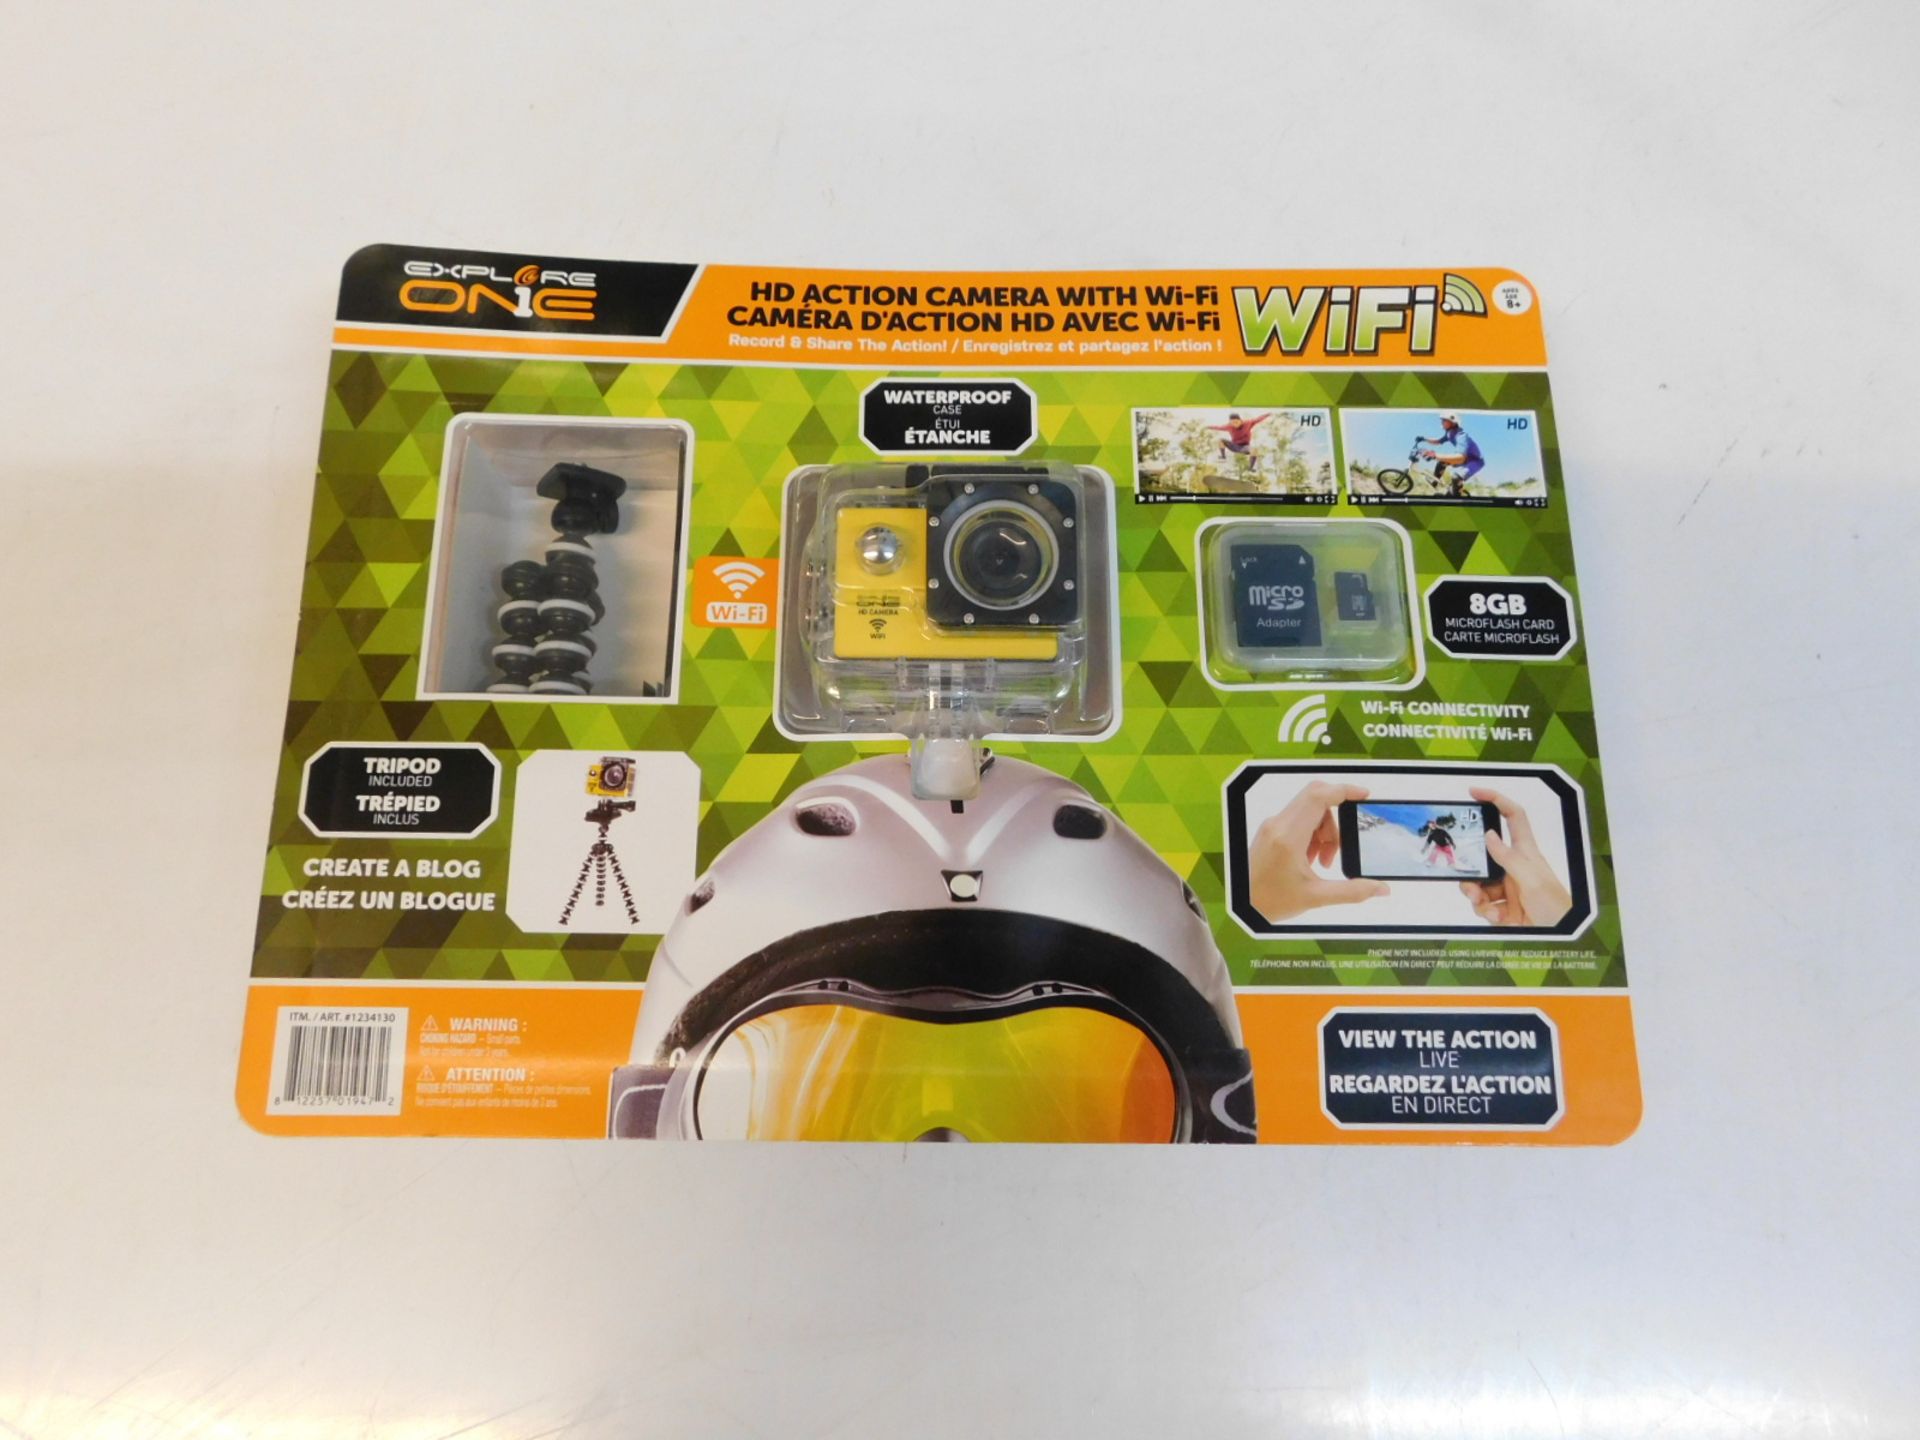 1 BRAND NEW PACK OF EXPLORE 1 HD ACTION CAMERA WITH WIFI RRP £29.99